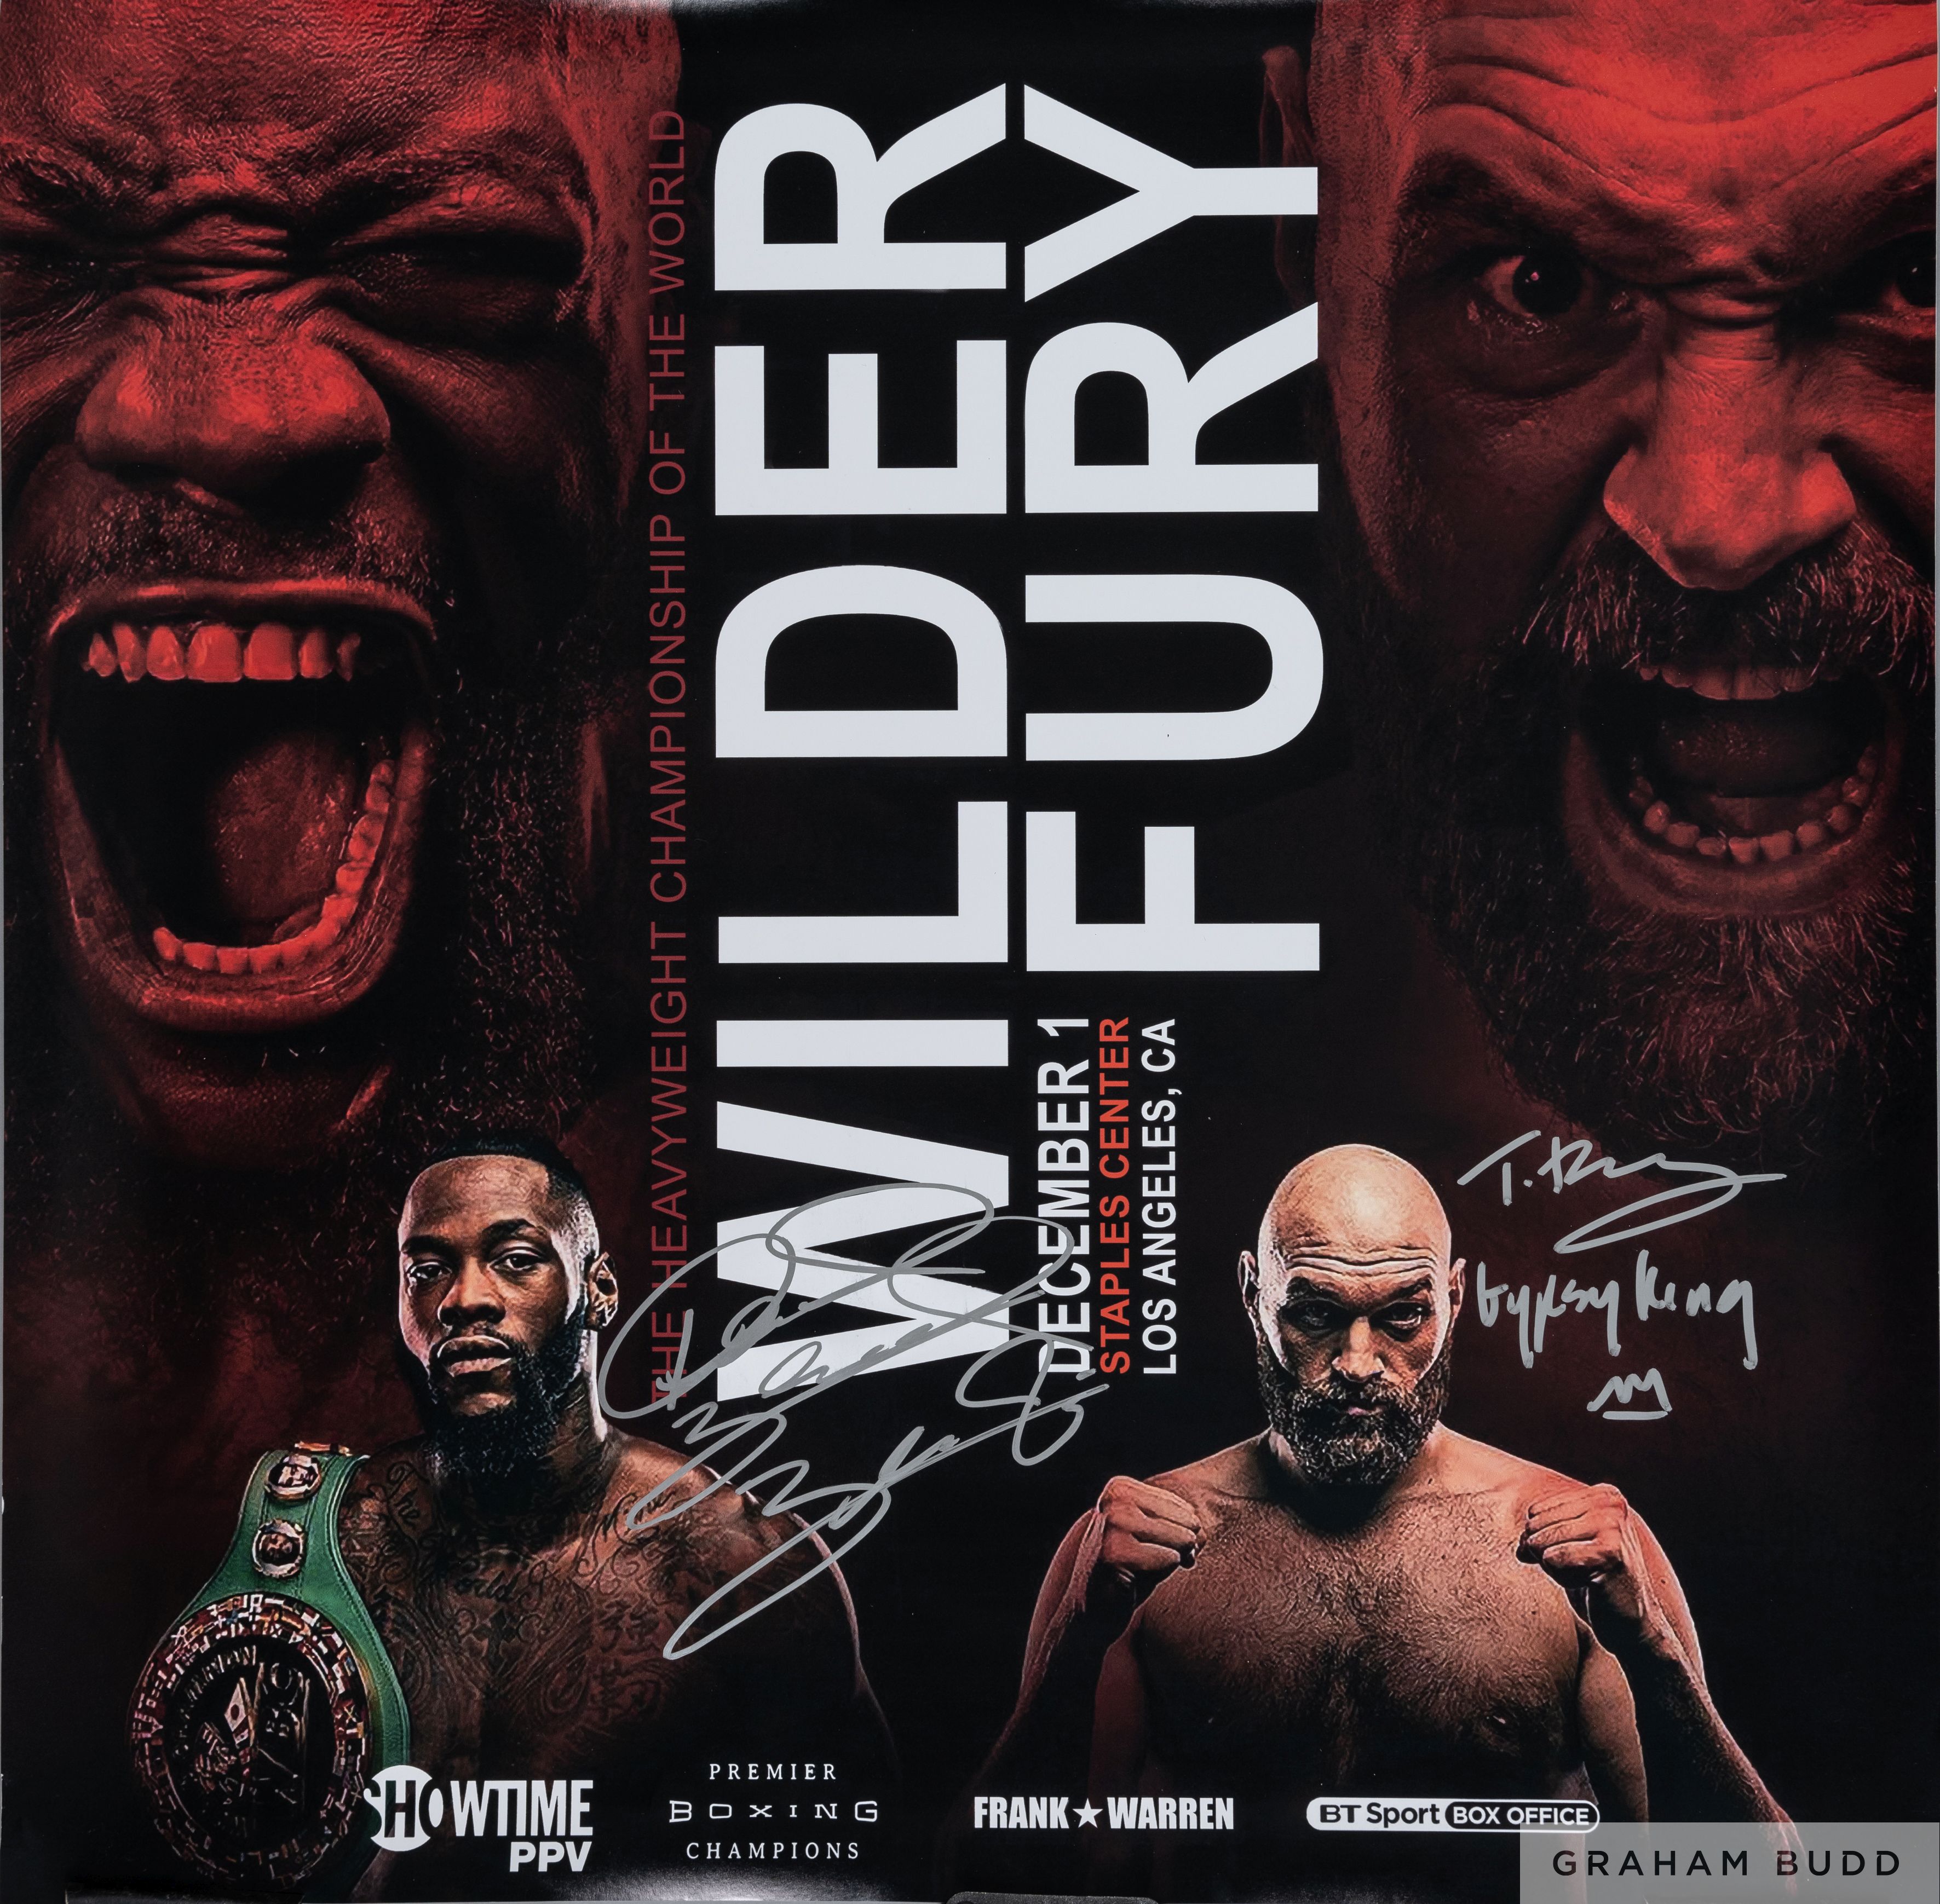 Deontay Wilder v. Tyson Fury signed fight poster